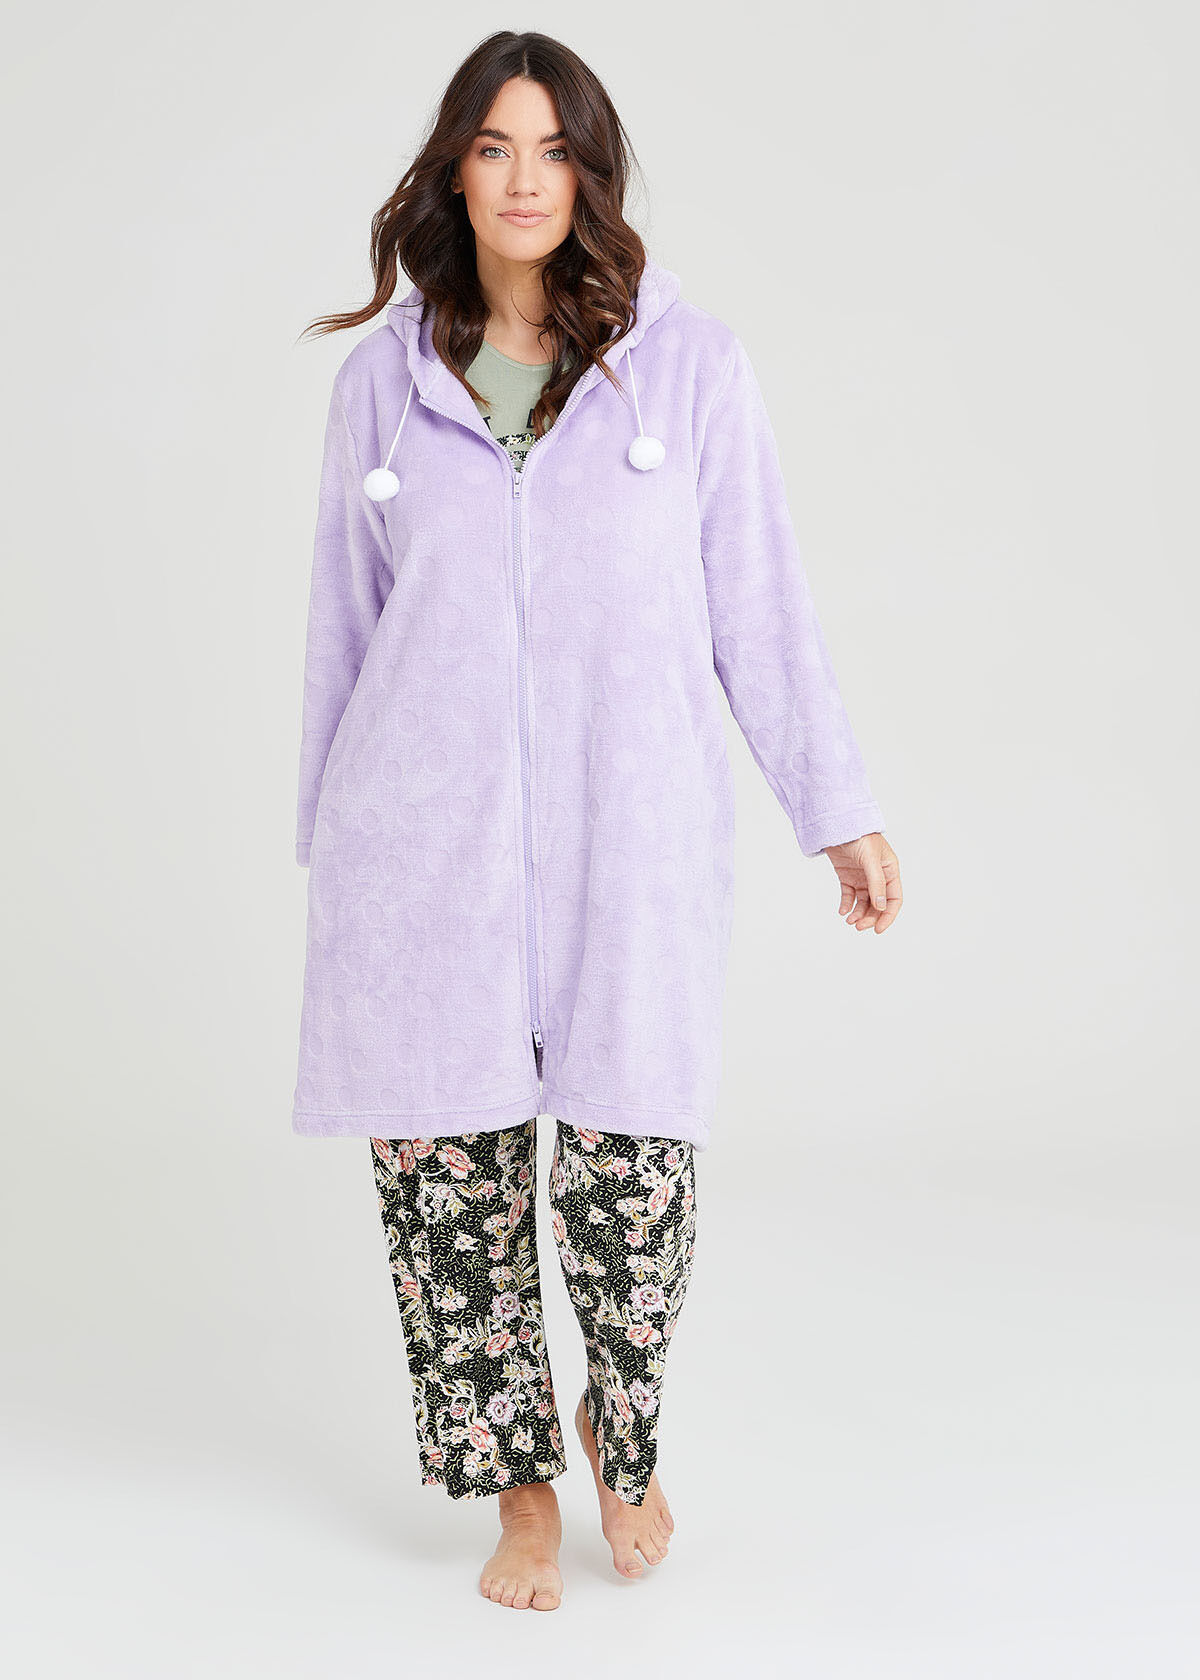 Women's hooded dressing gown with full front zip